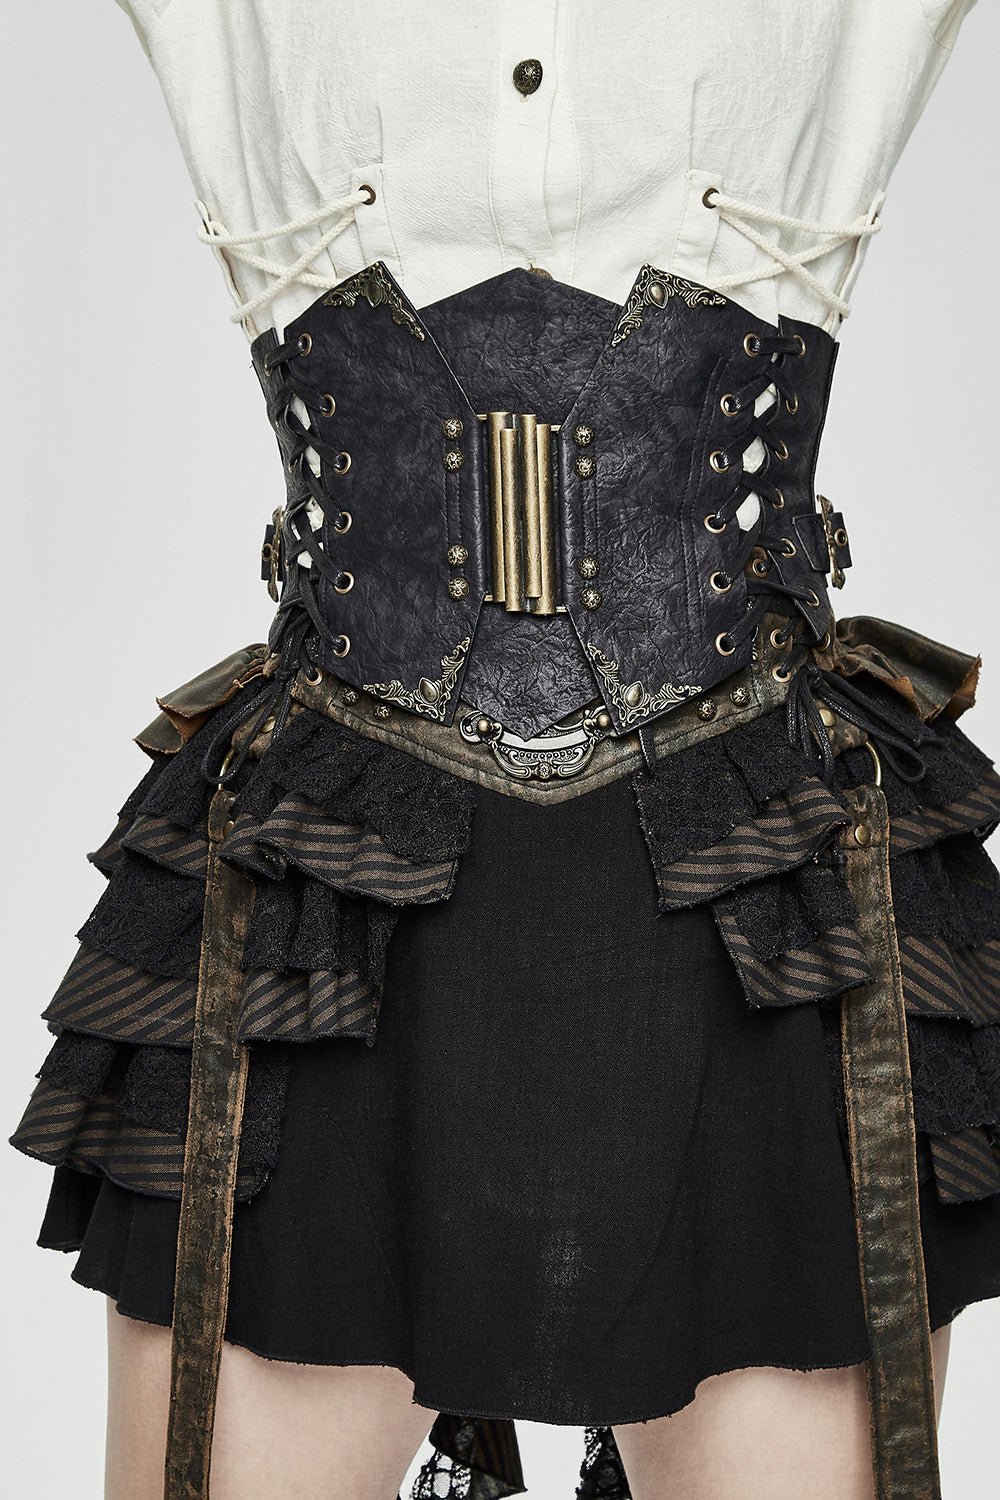 Large selection of women's metal corsets. All in stock. Occult